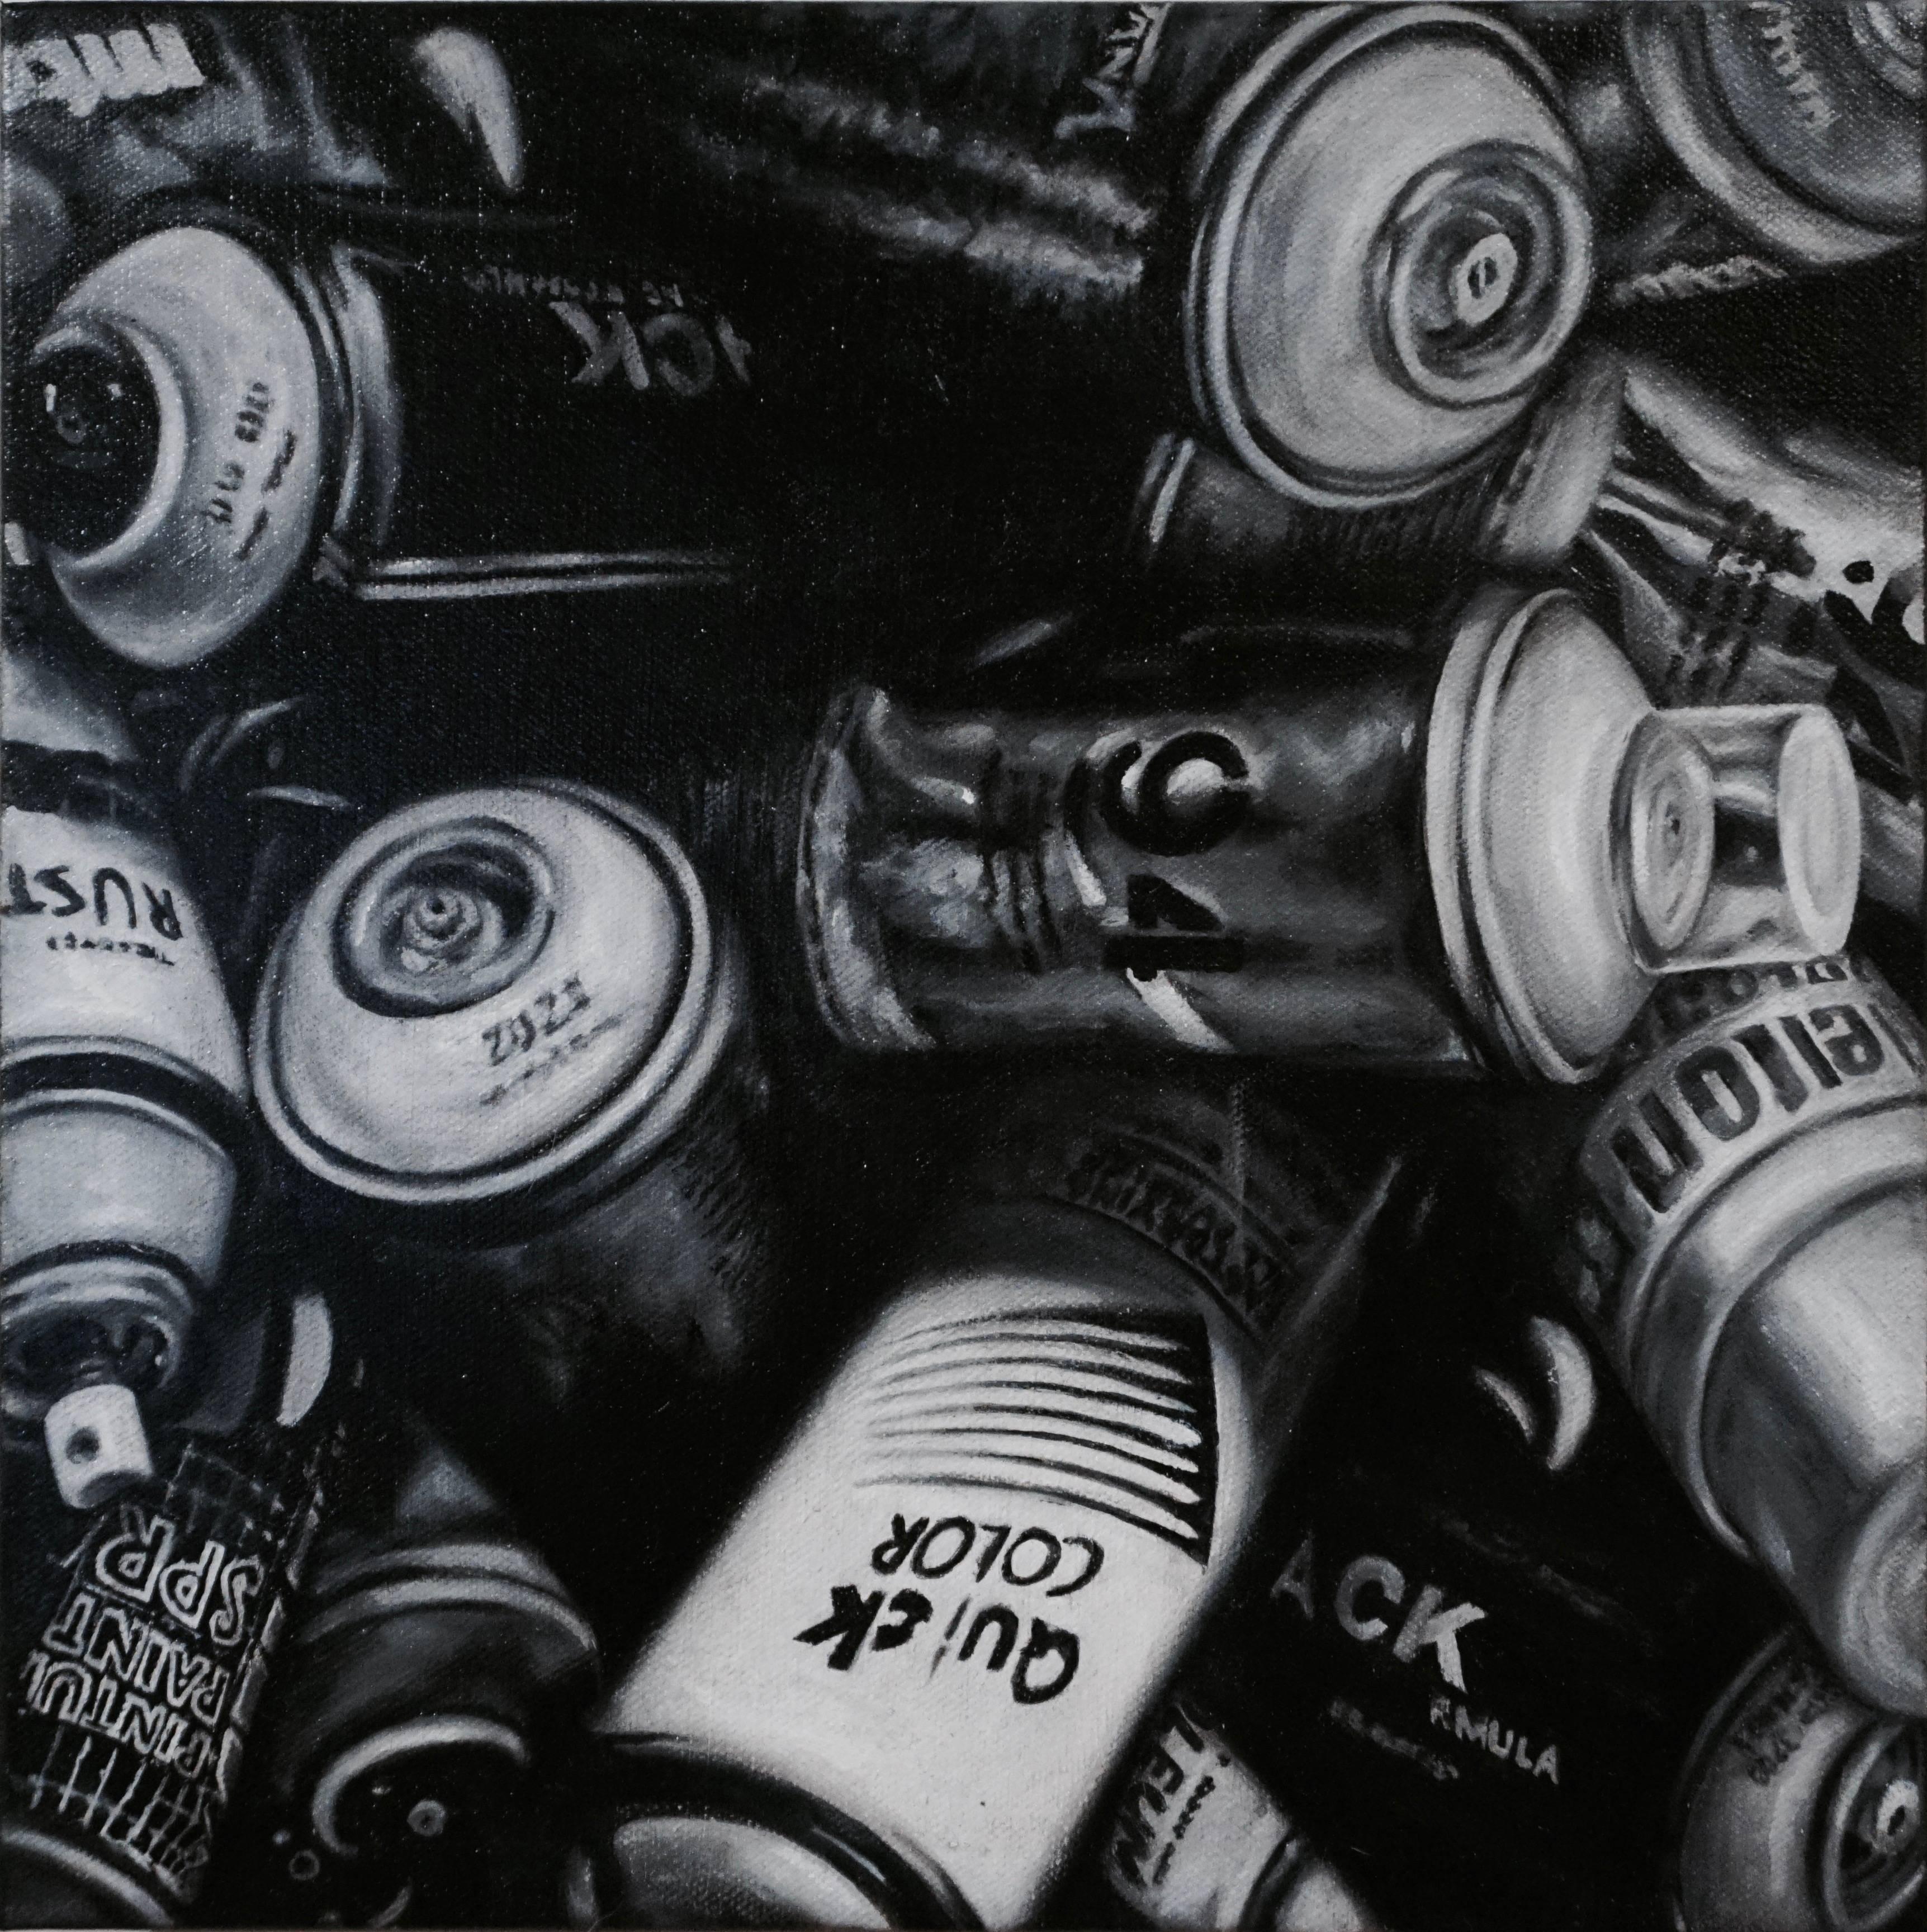 Cans - Painting by Zimer